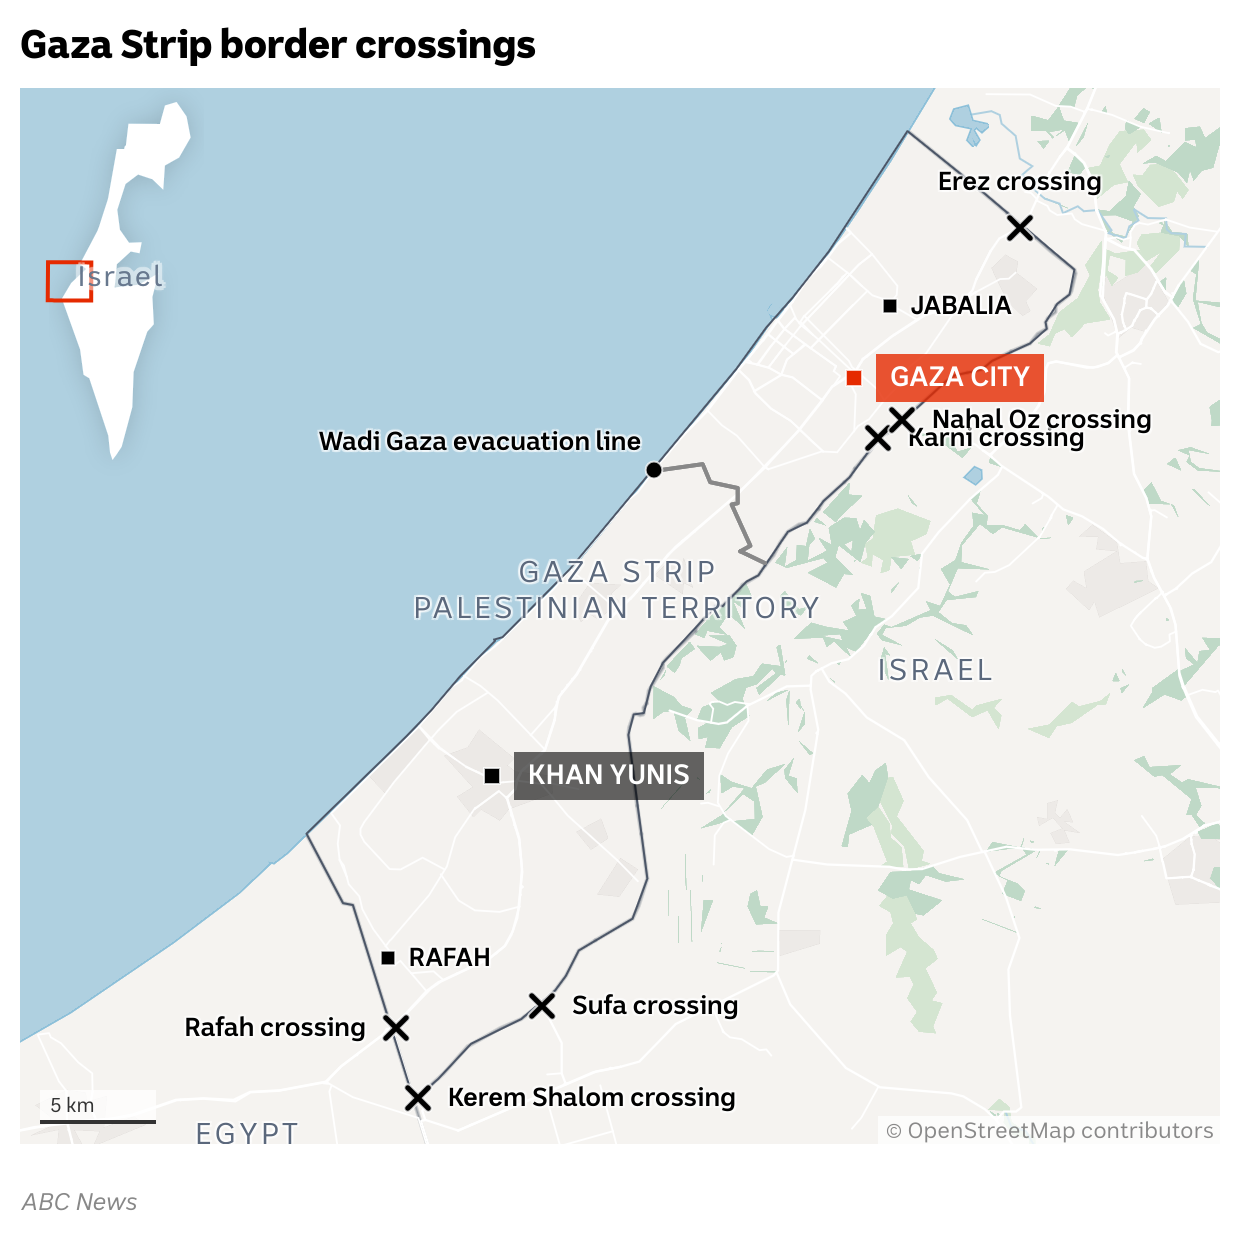 A map of the Gaza Strip showing the various border crossings, major cities and the Israeli army's evacuation line